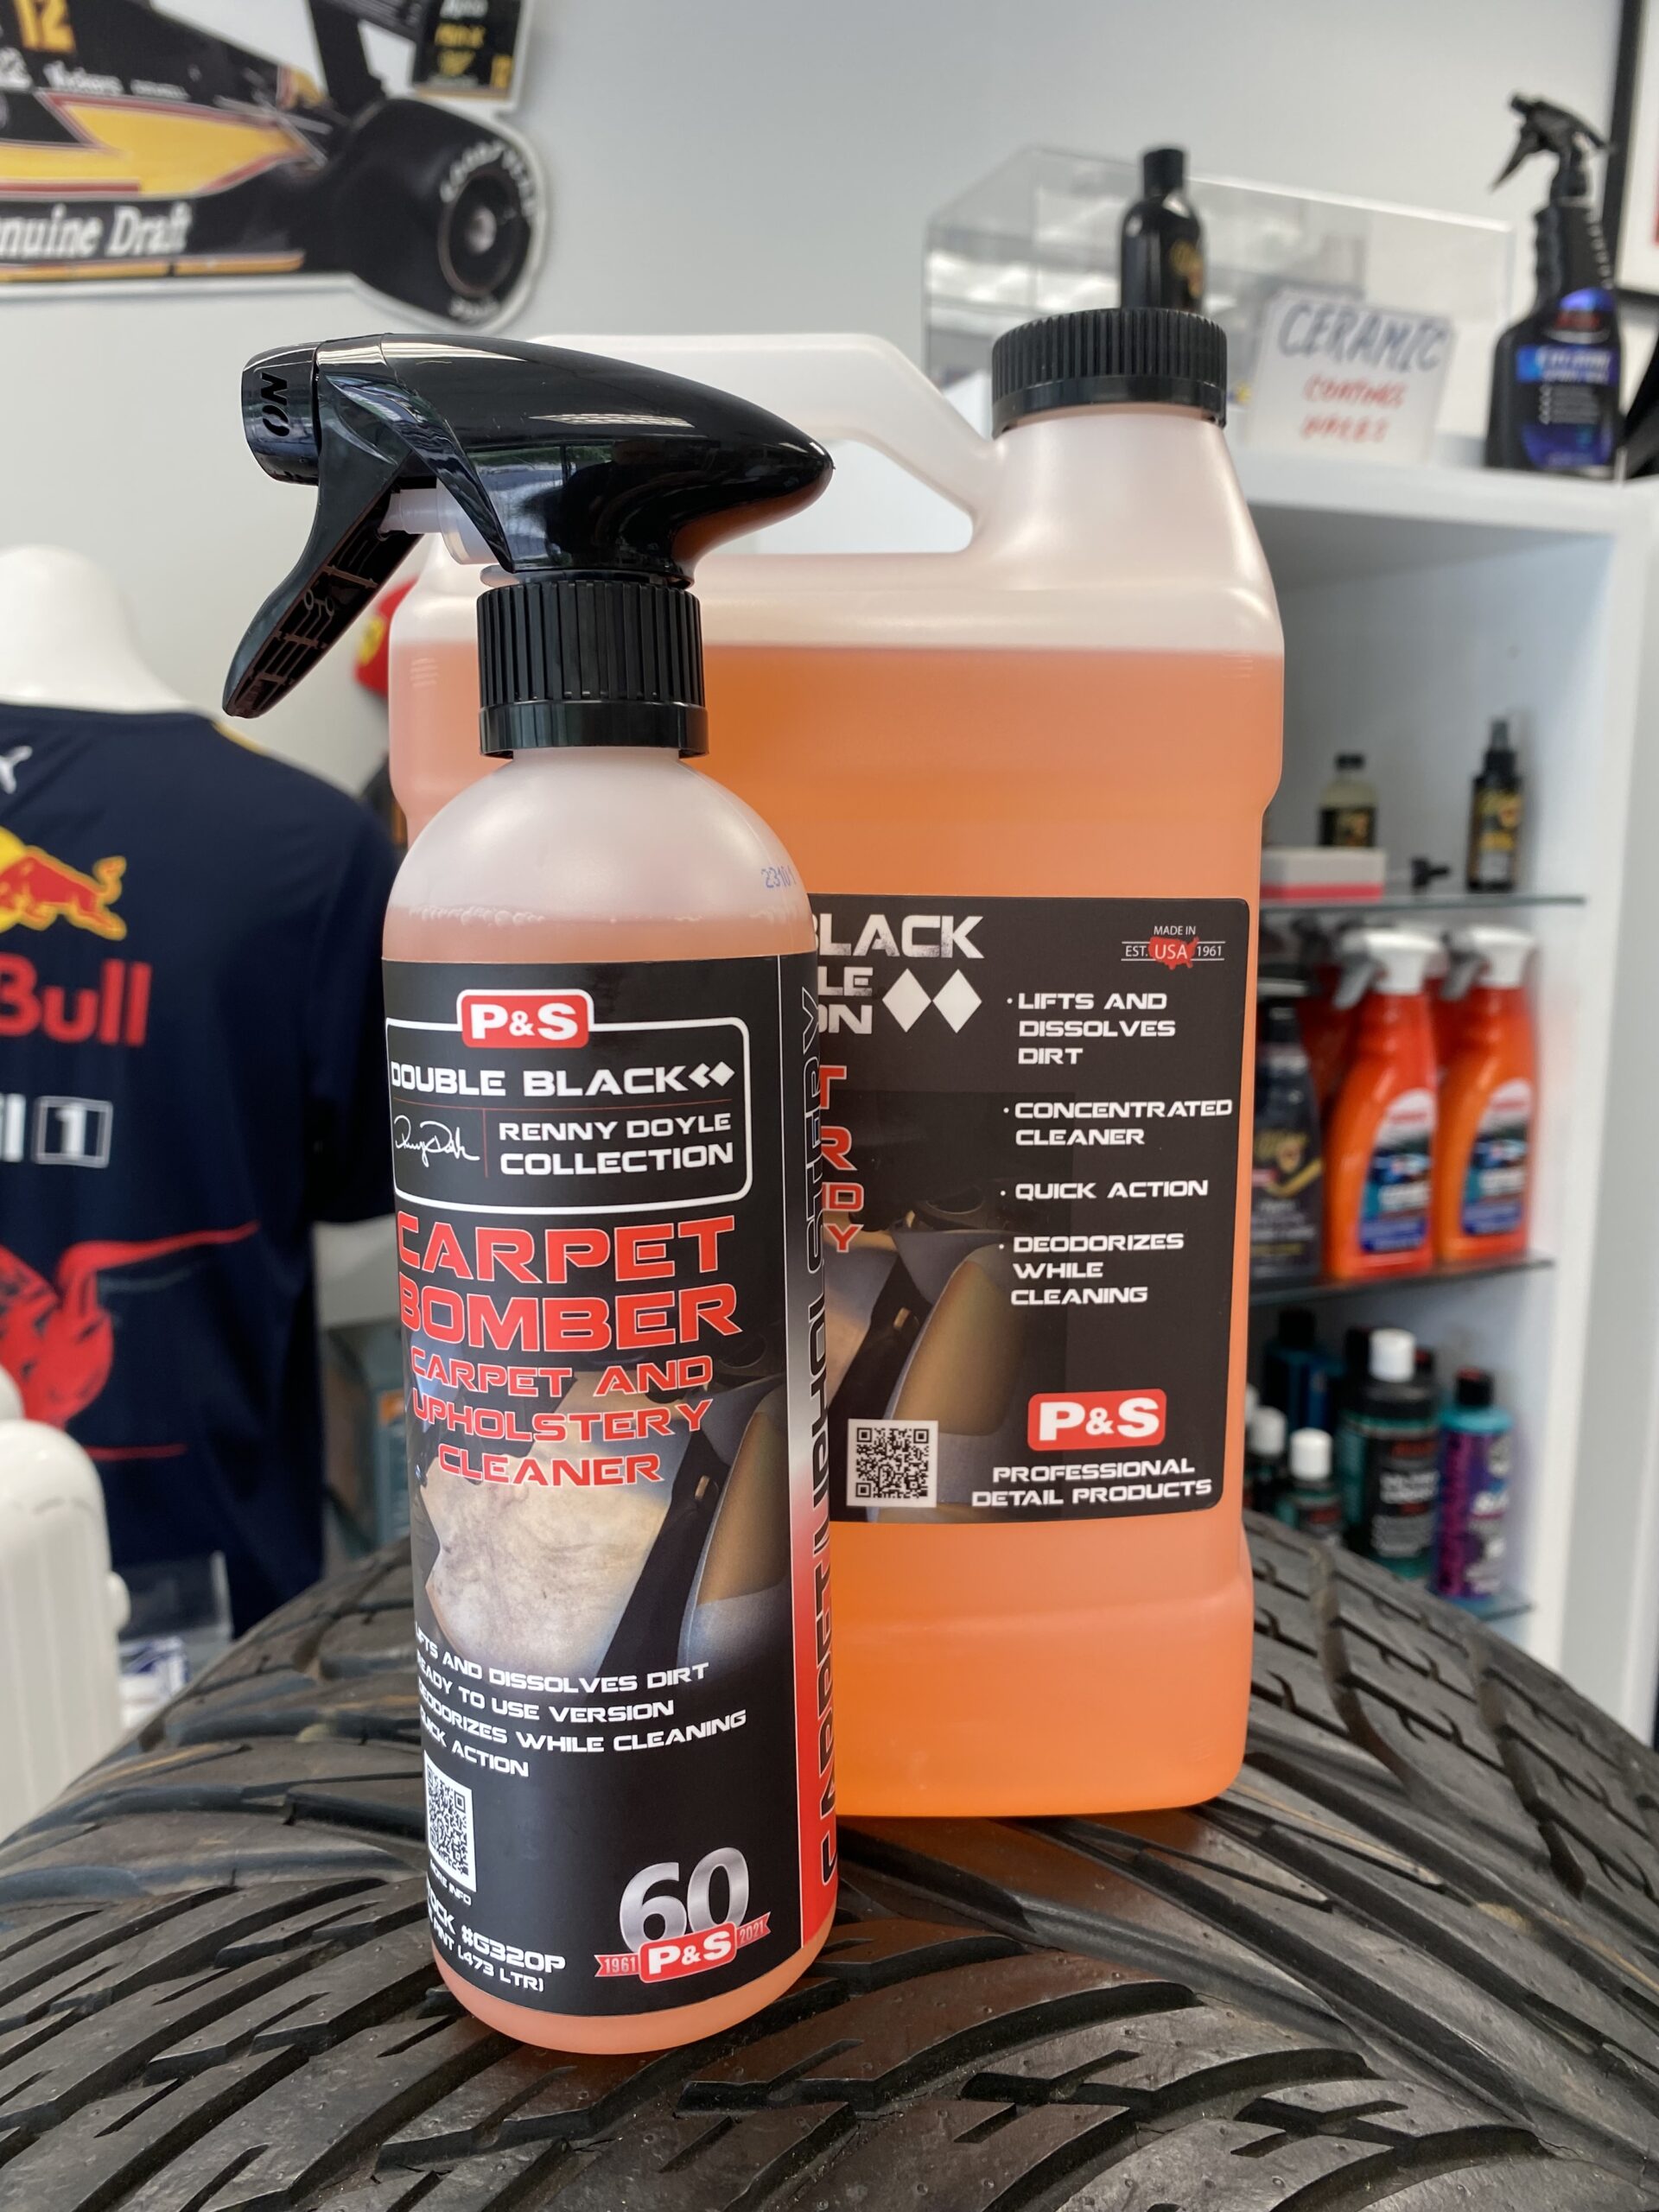 P&S Professional Detail Products - Carpet Bomber - Carpet and Upholstery  Cleaner; Citrus Based Cleaner Dissolves Grease and Lifts Dirt; Dilutable;